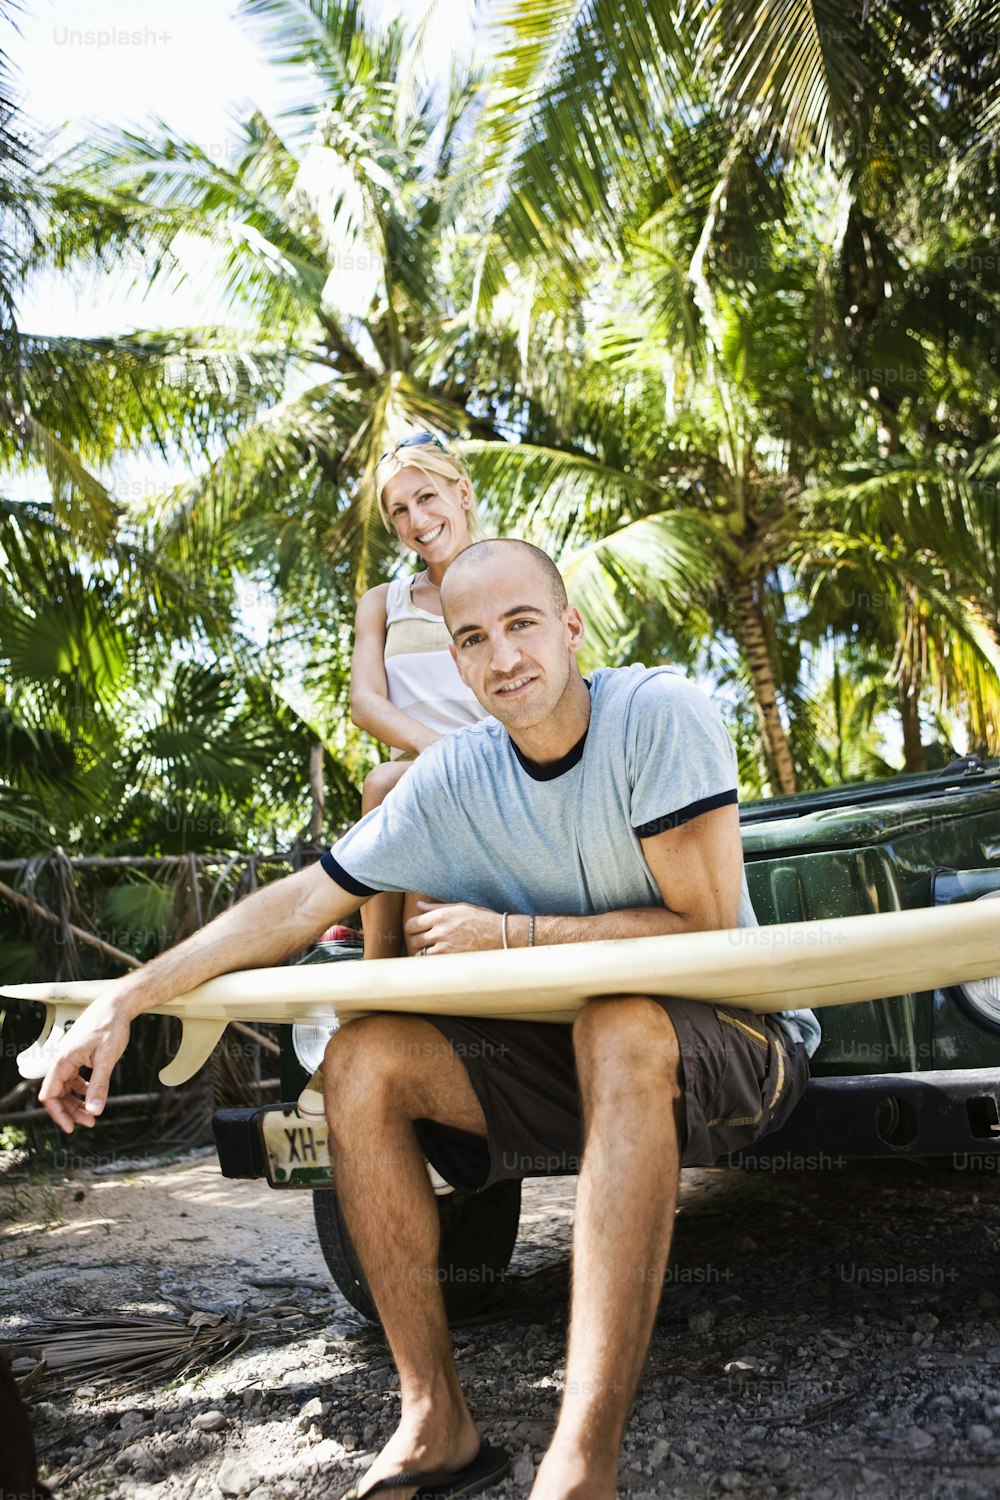 a man holding a surfboard next to a woman